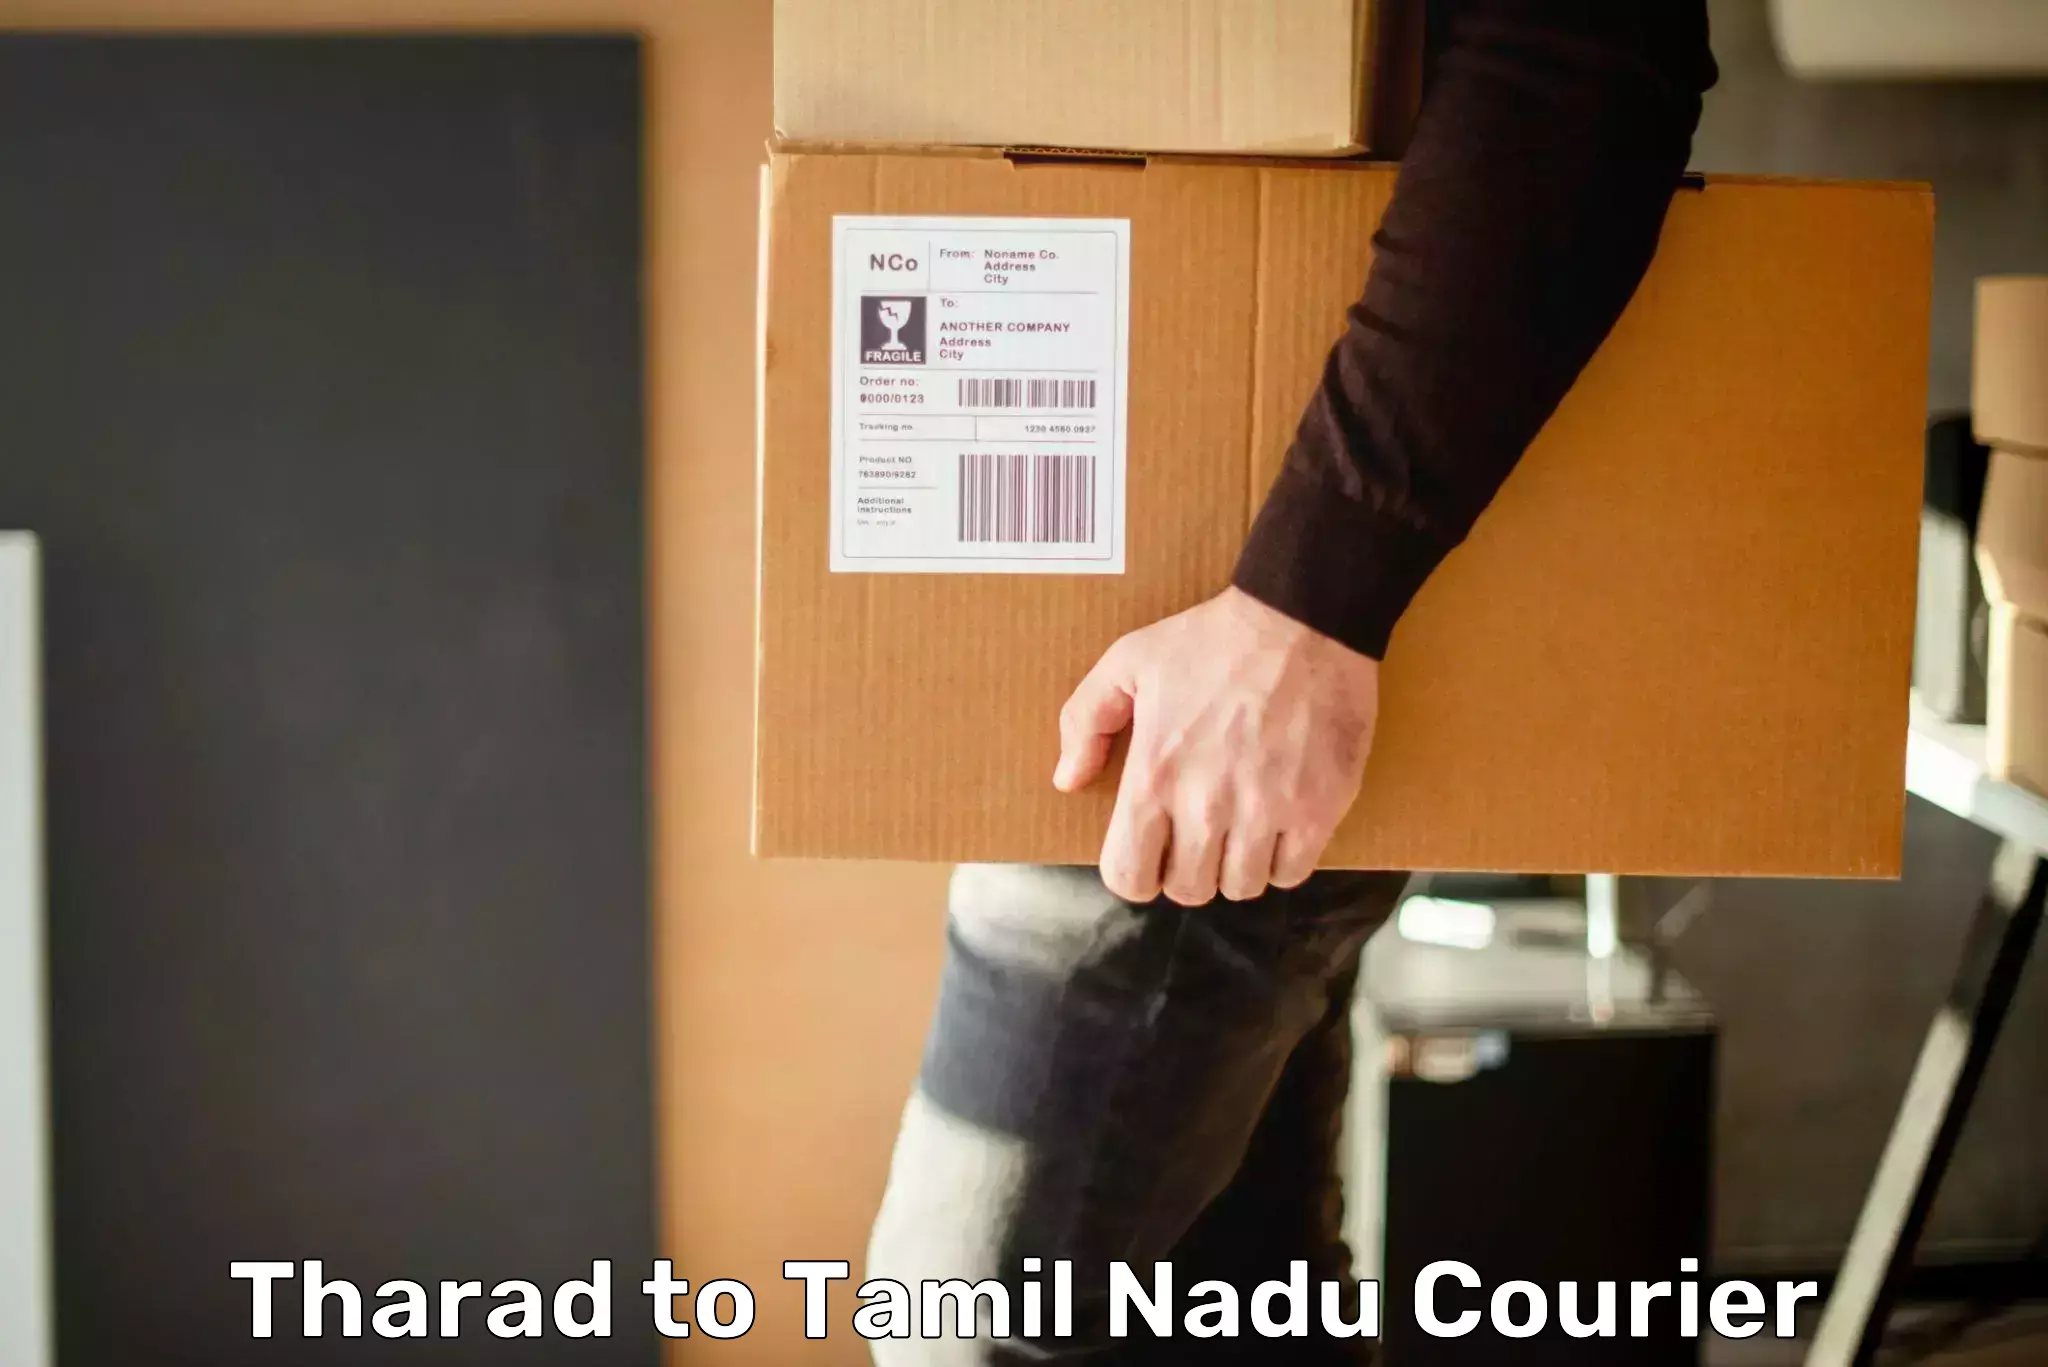 Express delivery network Tharad to Chengalpattu